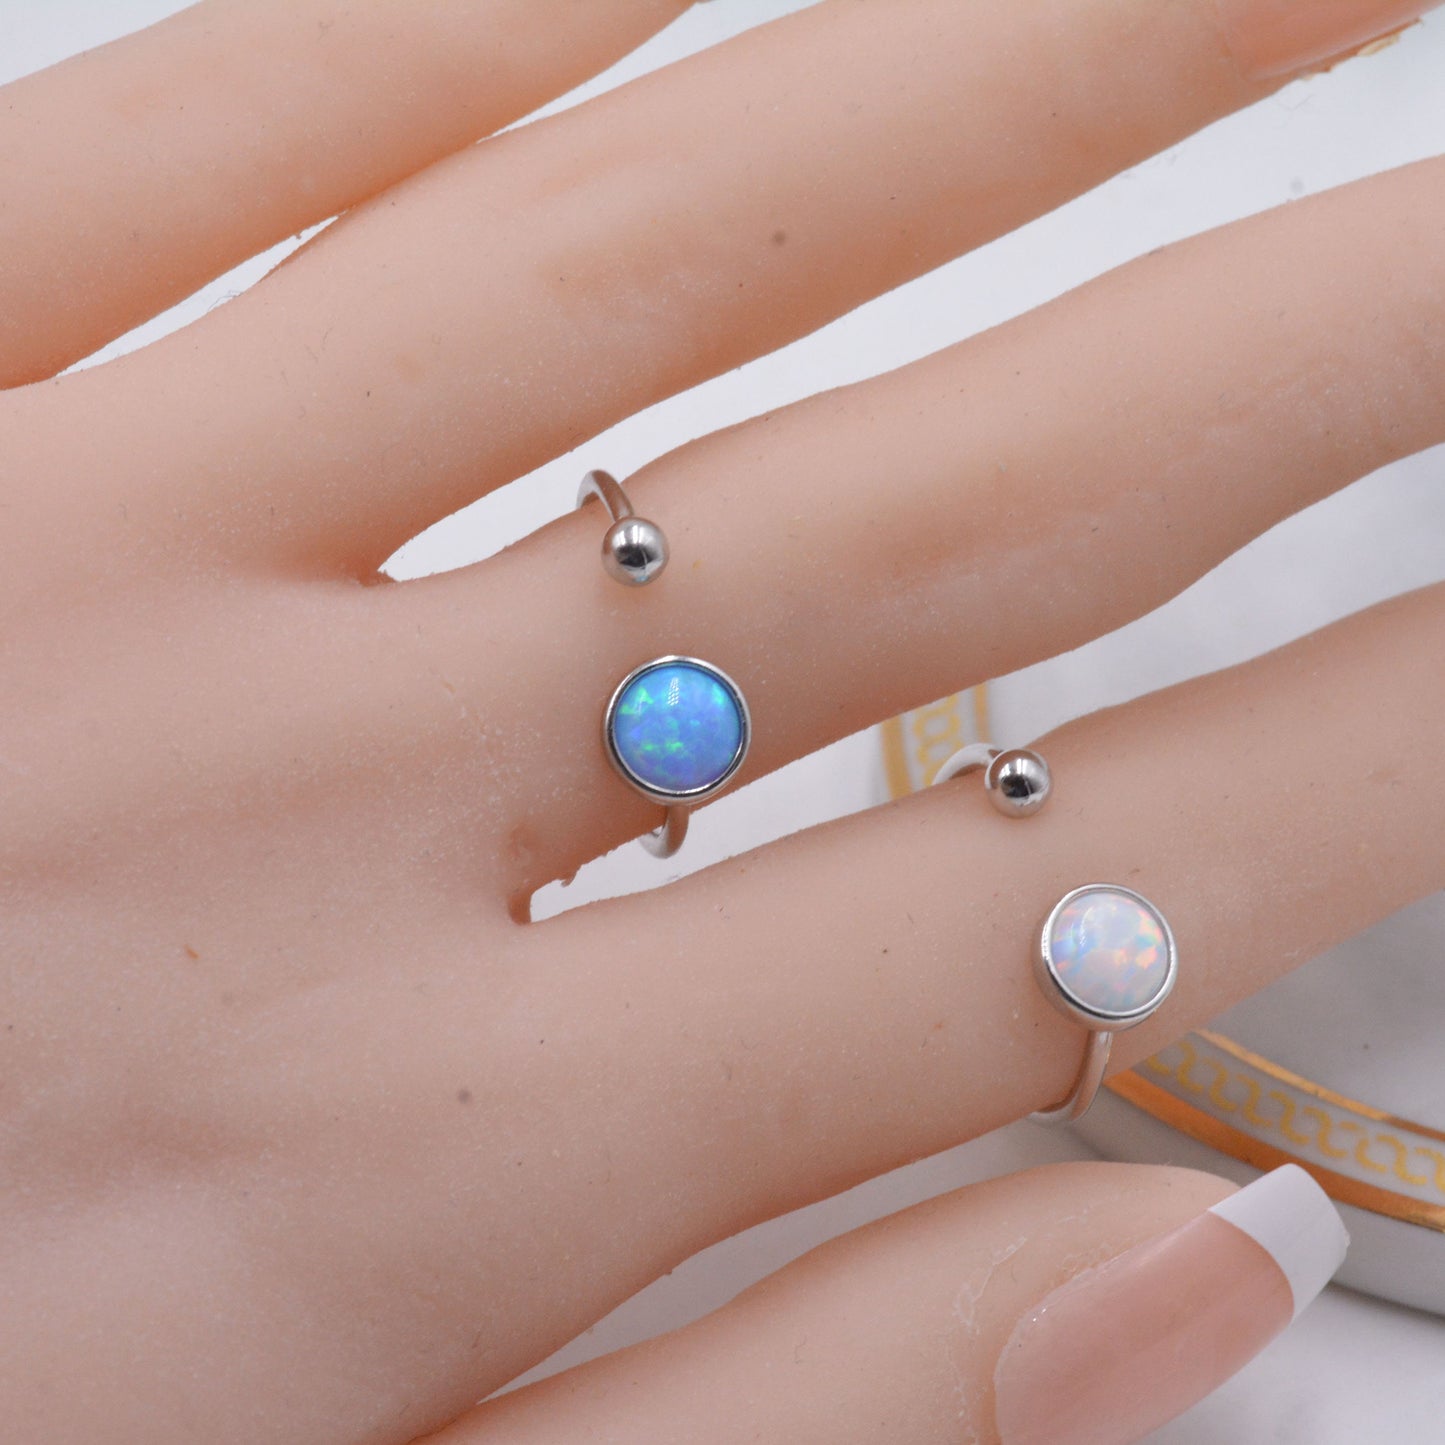 Sterling Silver Opal Ring, Open Ring Adjustable Size, Blue or White Opal, Skinny Stacking Ring, Midi Ring, Minimalist Geometric Ring